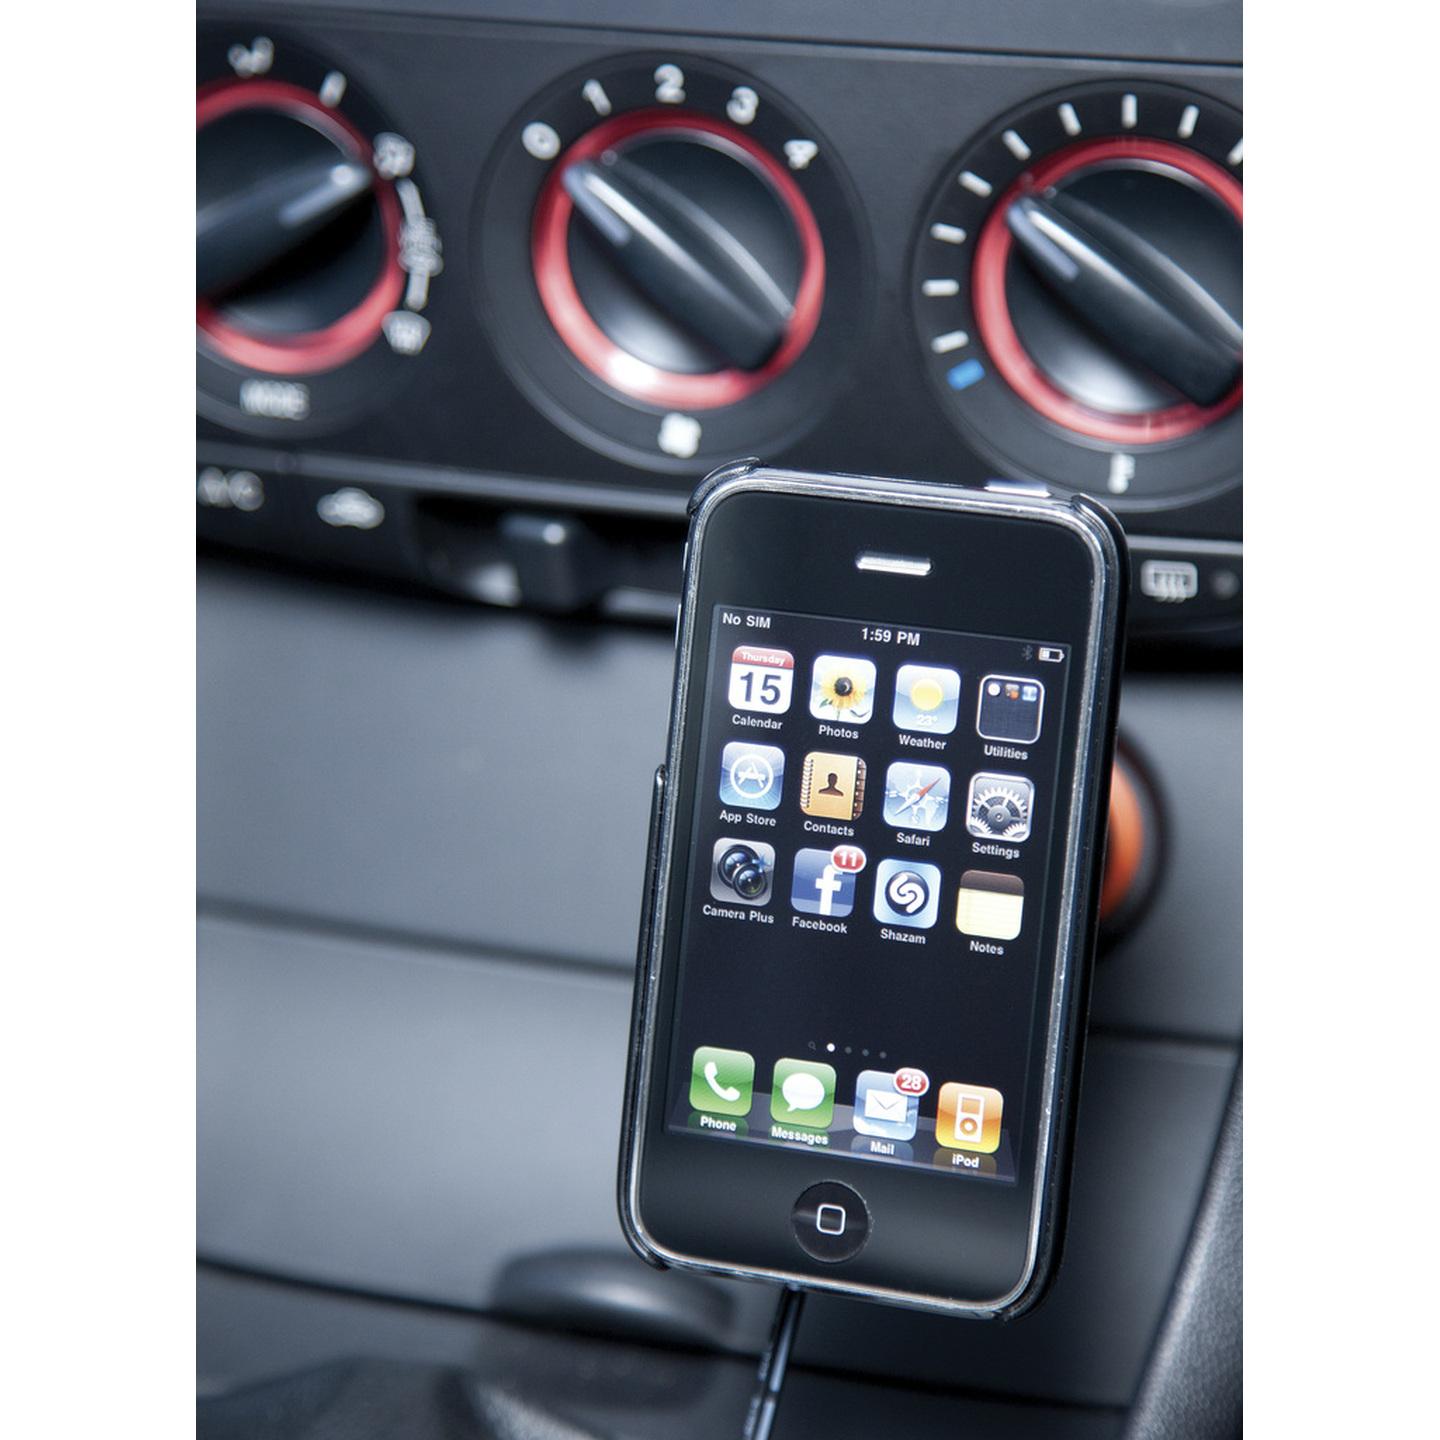 12VDC Charger Cradle for iPhone 3G/3GS/4/4S